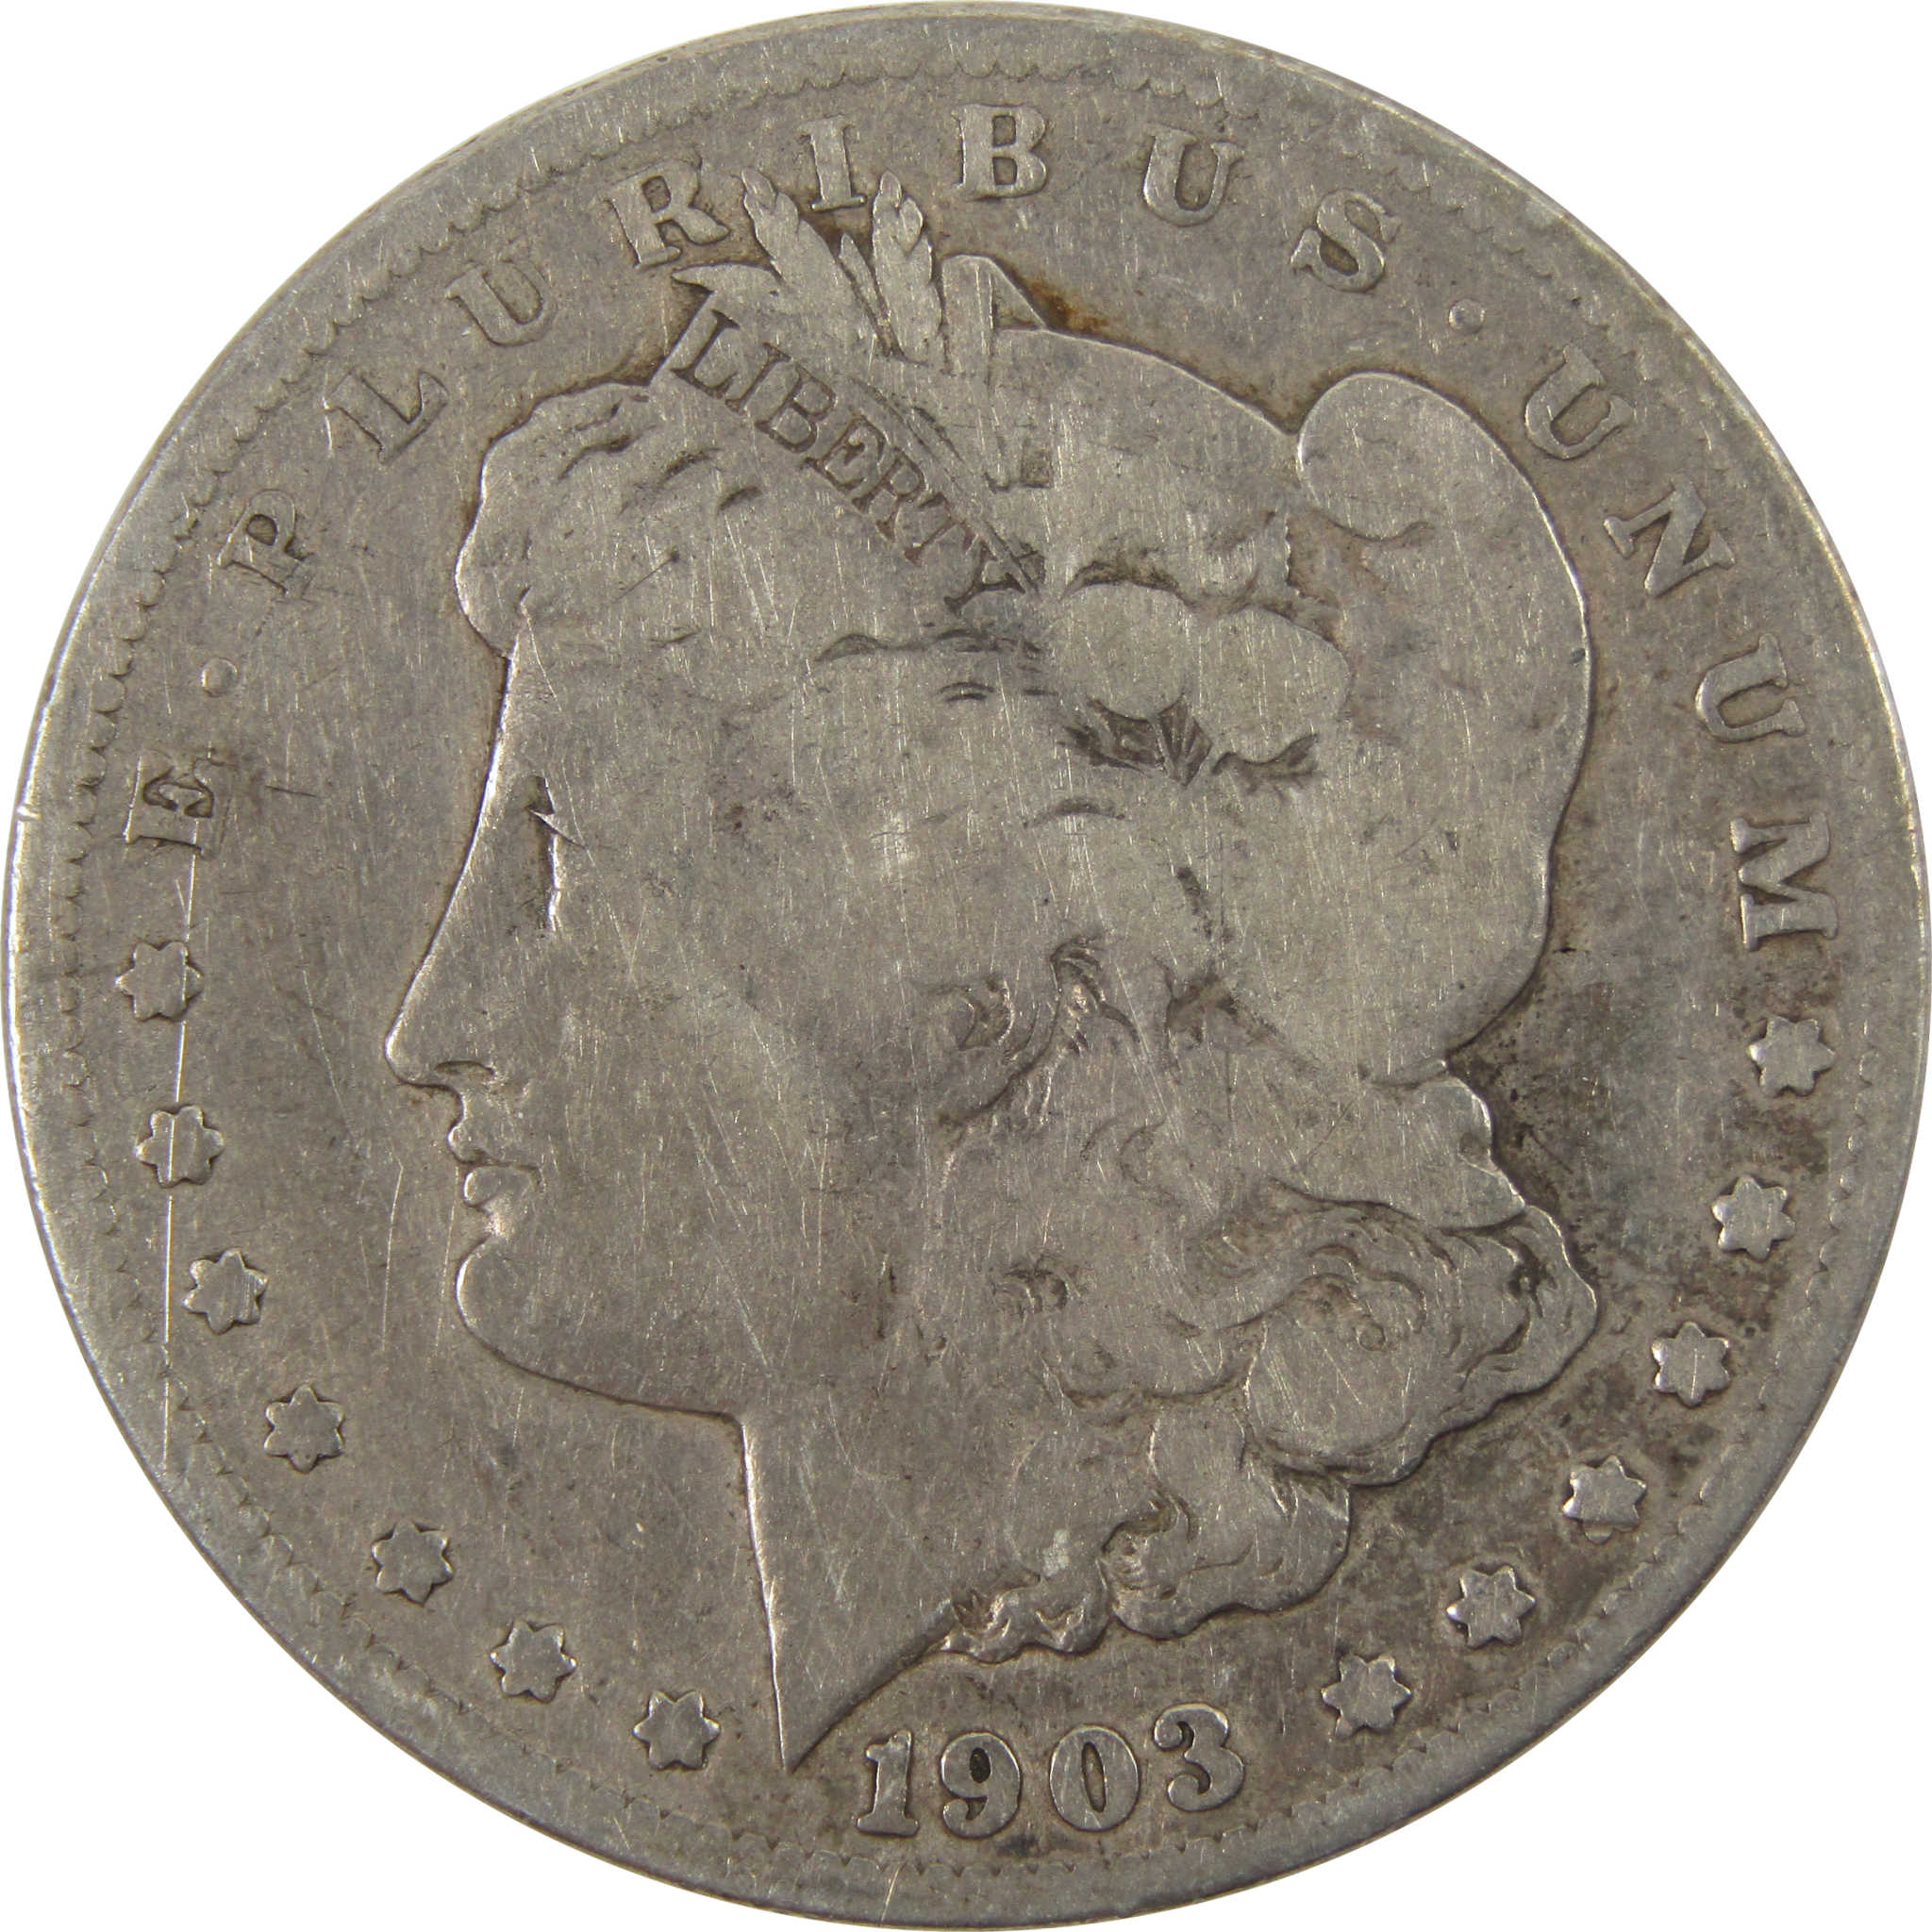 1903 S Morgan Dollar AG About Good 90% Silver $1 Coin SKU:I10041 - Morgan coin - Morgan silver dollar - Morgan silver dollar for sale - Profile Coins &amp; Collectibles